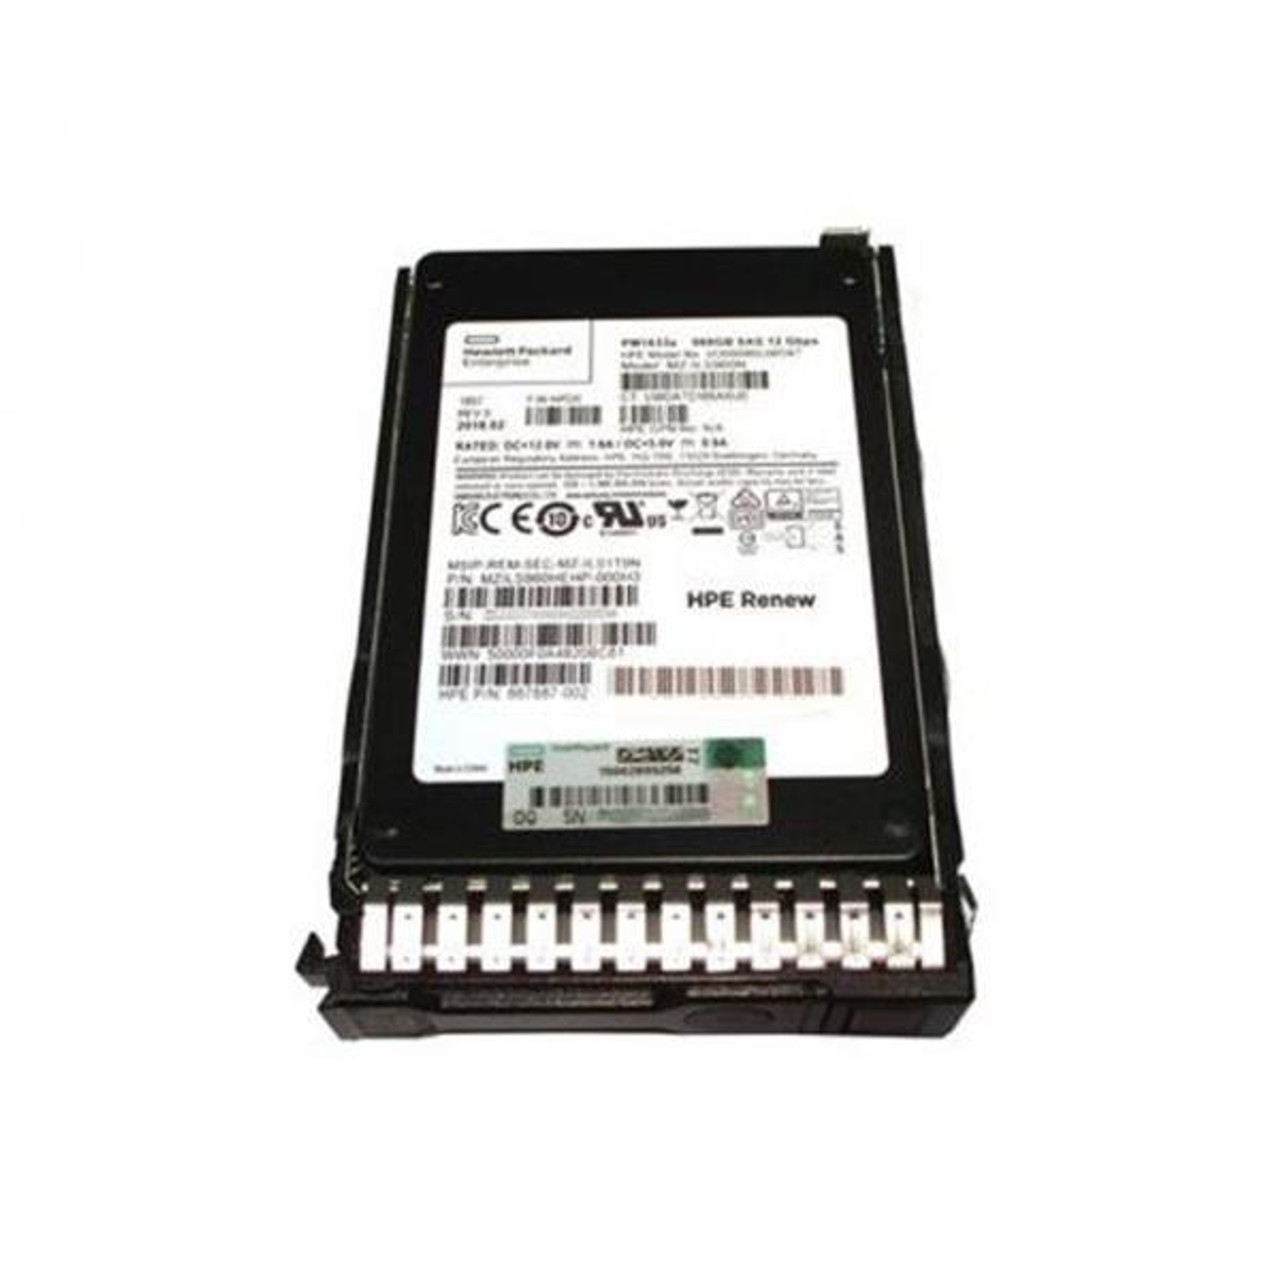 P10448-B21 HPE 960GB SAS 12Gbps Mixed Use 2.5-inch Internal Solid State Drive (SSD) with Smart Carrier